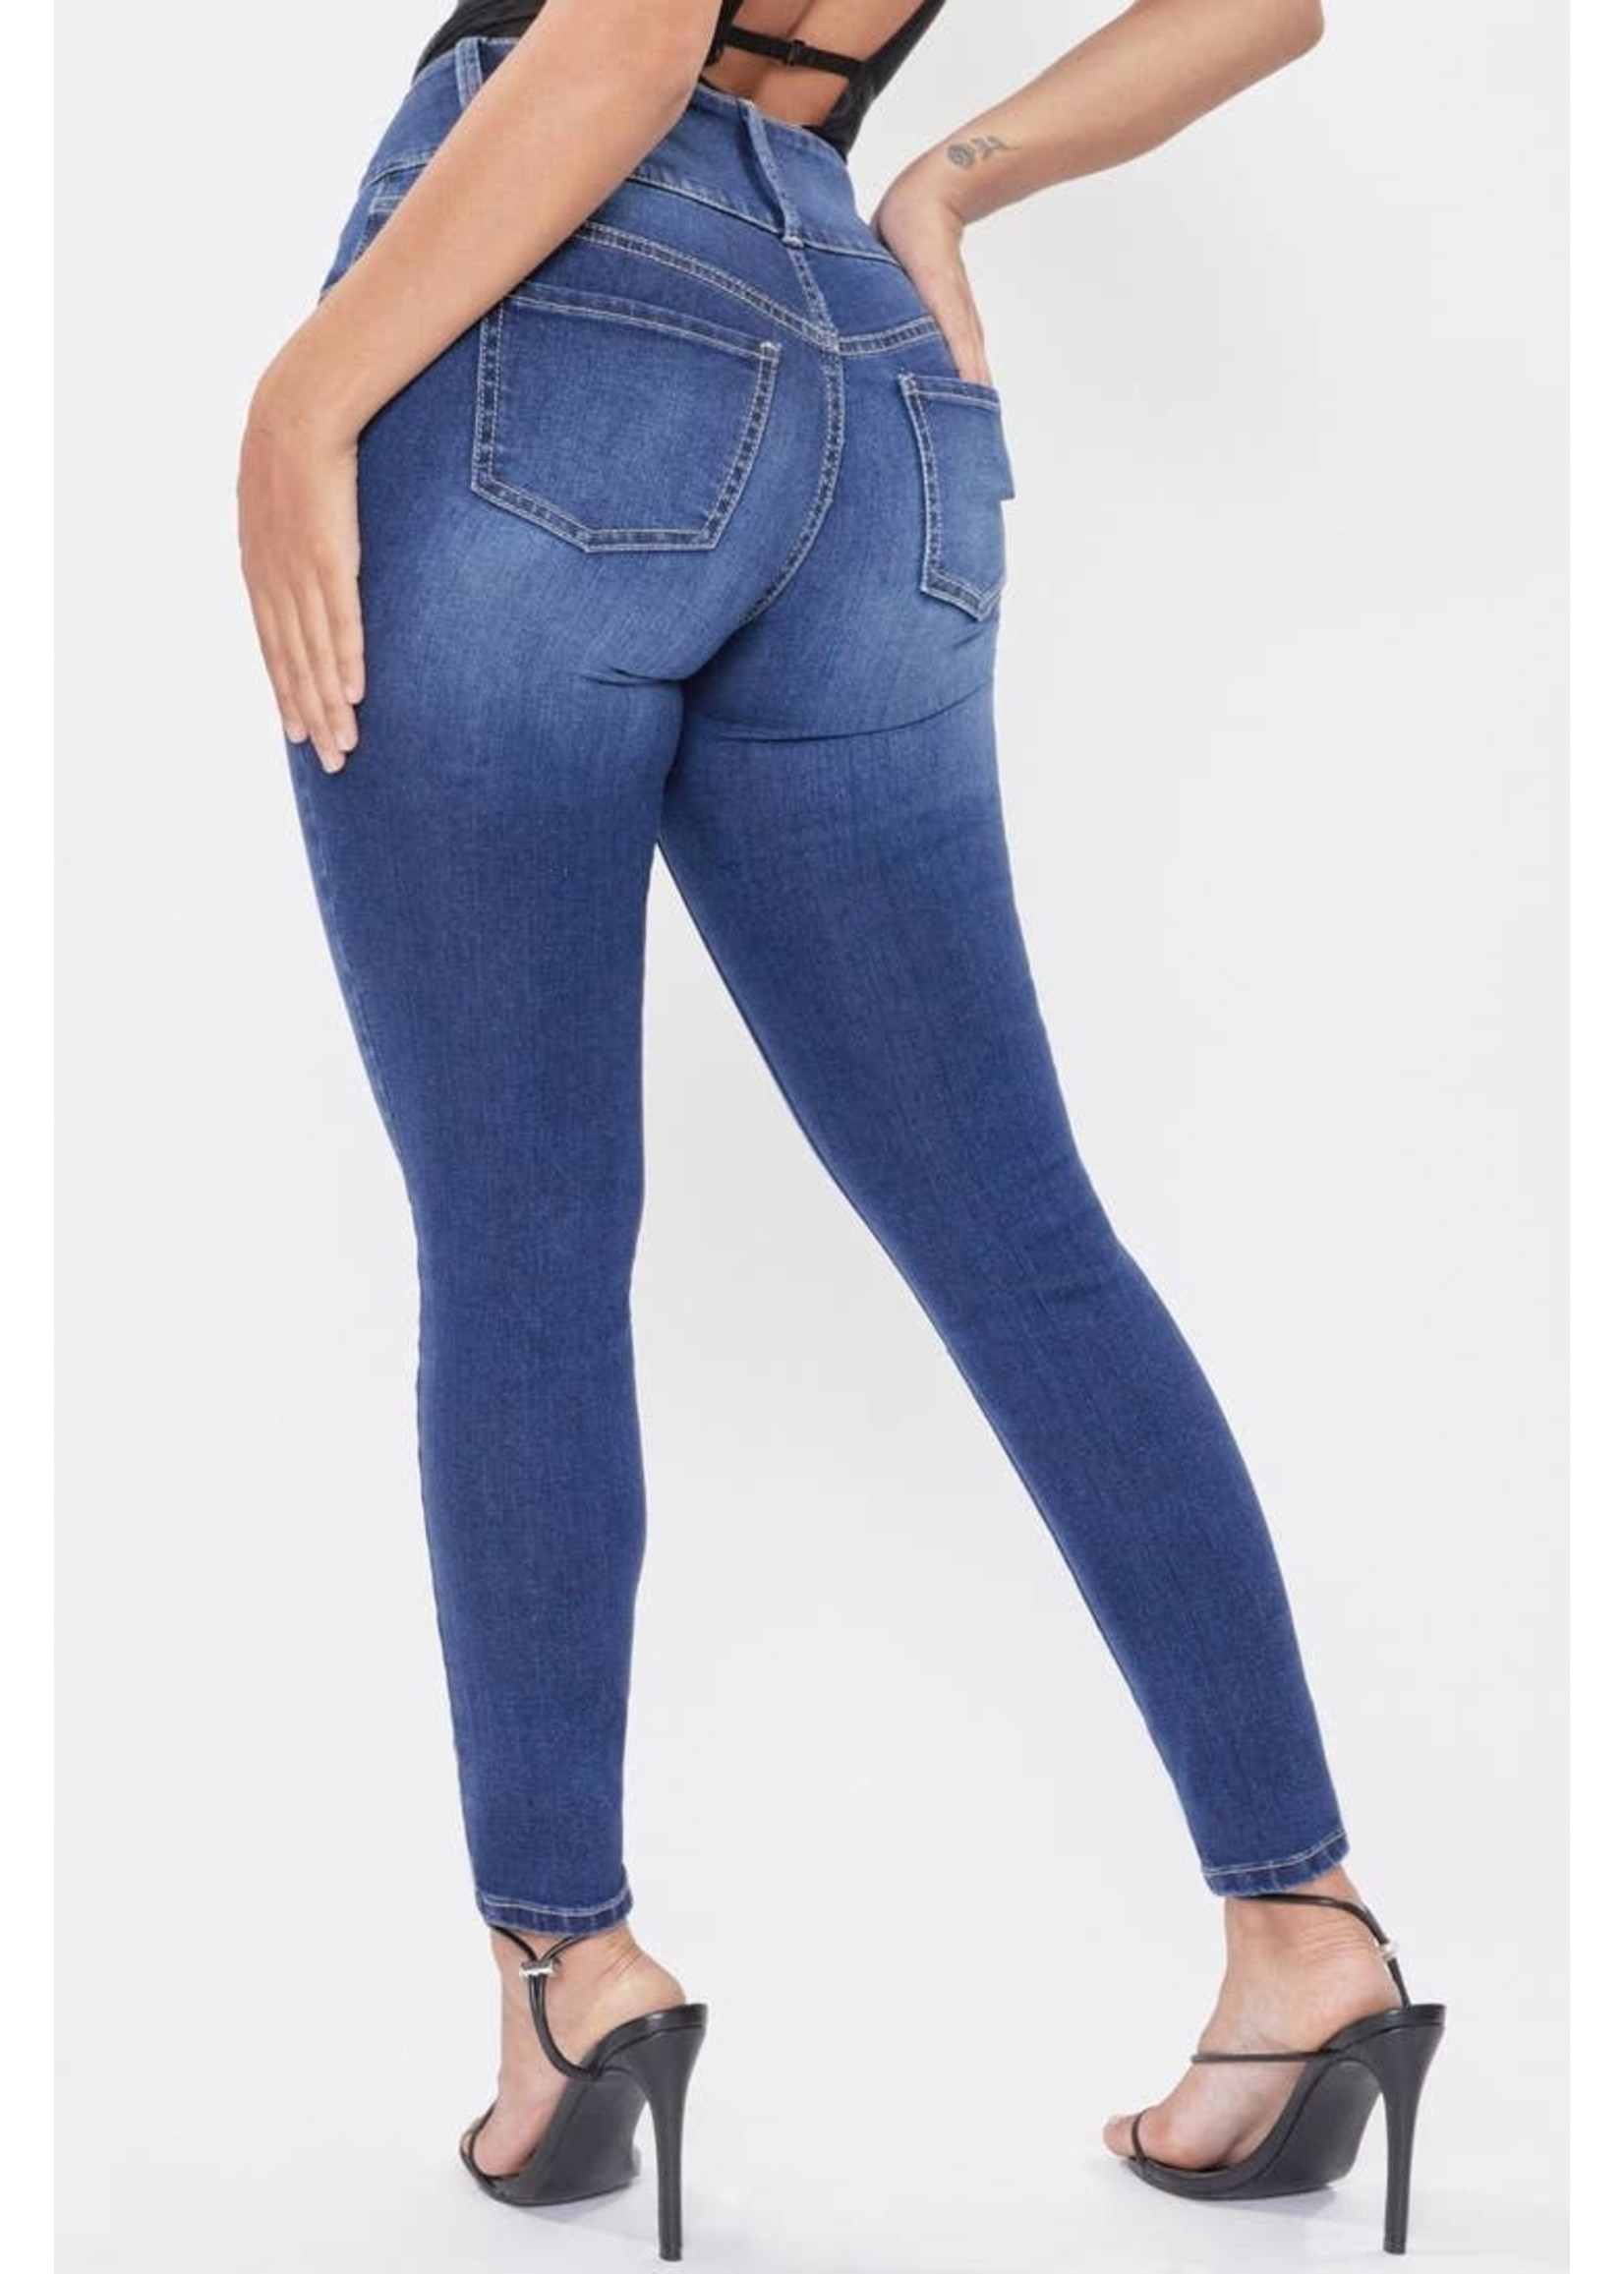 YMI 3 Button High-Rise Skinny Jeans